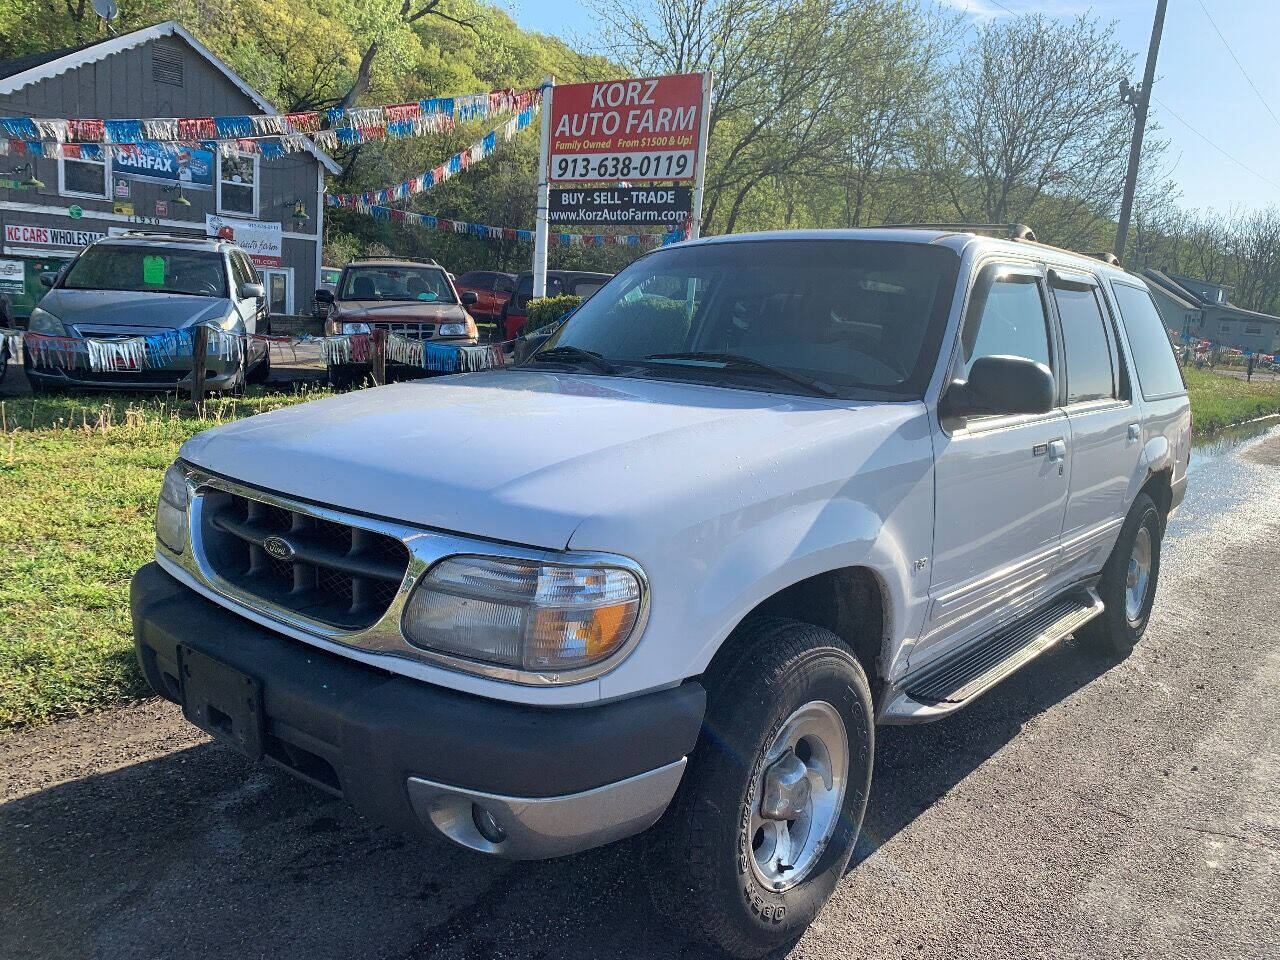 Used 1999 Ford Explorer For Sale In Green Bay Wi Carsforsale Com